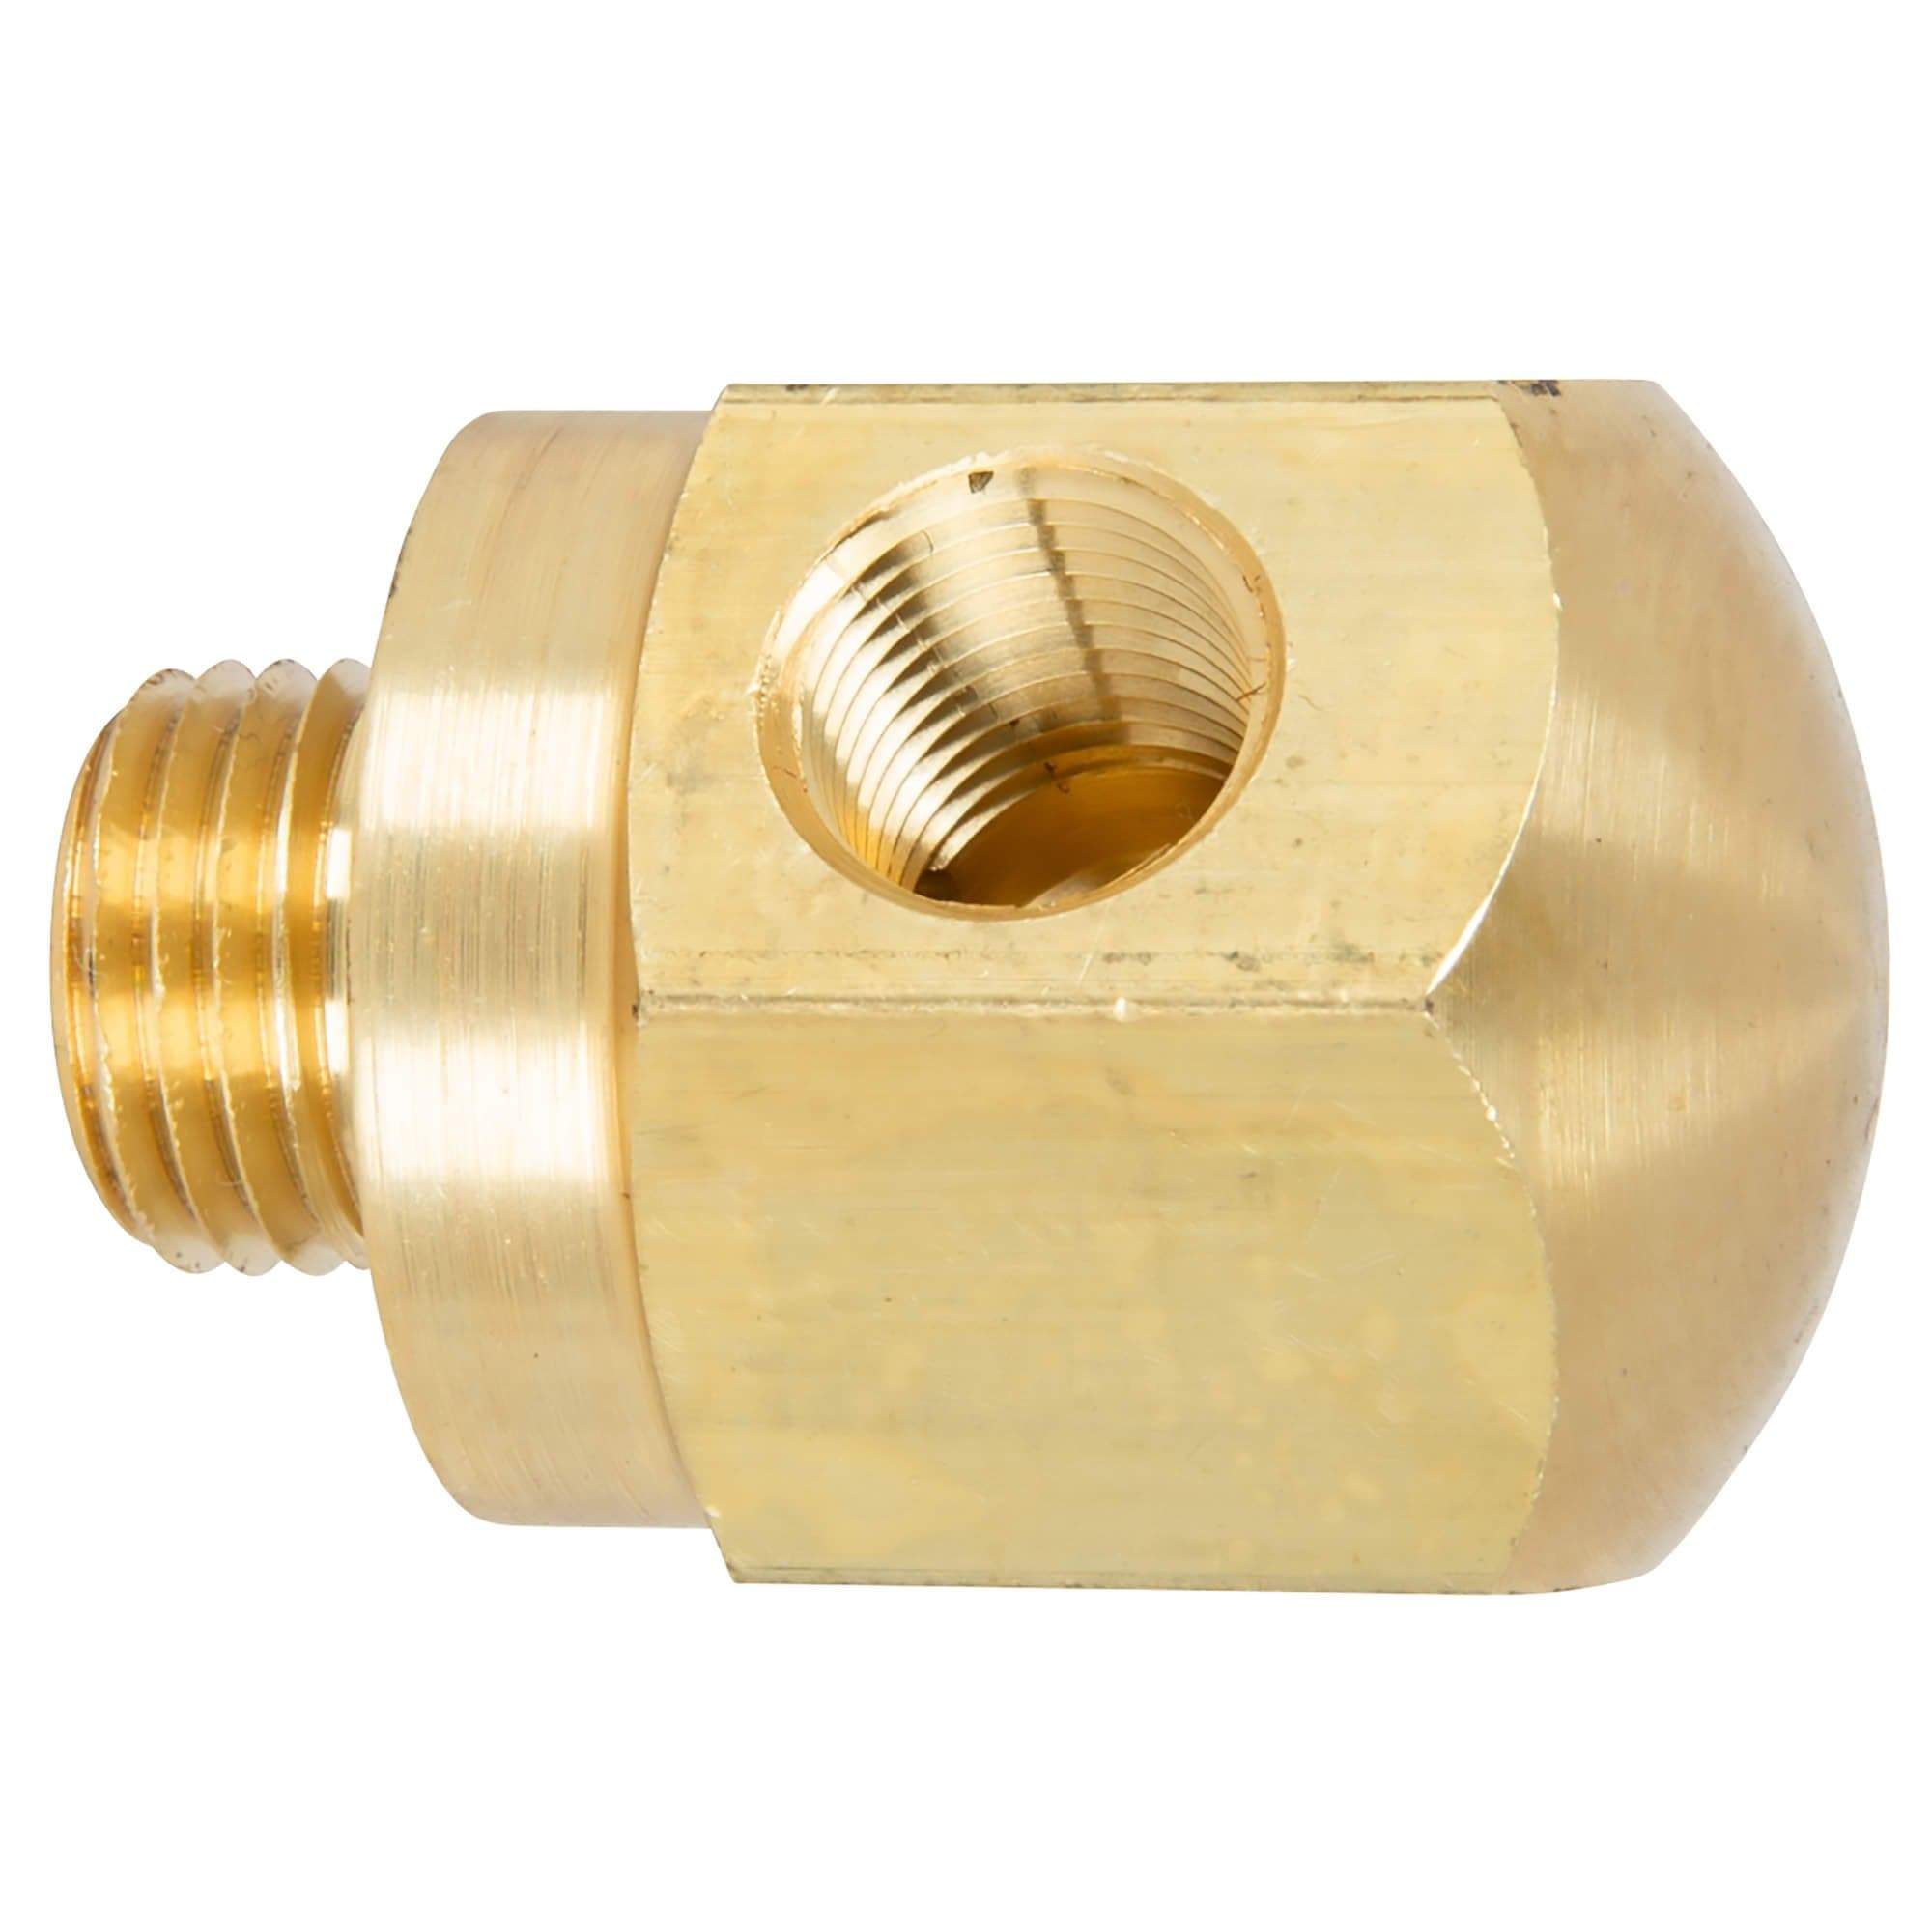 Brass Compression - Fittings 90-Degree Elbow - Tube to Male Pipe - 1/4 Inch  Tube x 1/8 Inch Male Pip, 90° Elbow Tube to Male Pipe, Air Shift  Transmission Fittings, Brass Fittings, Fluid Power